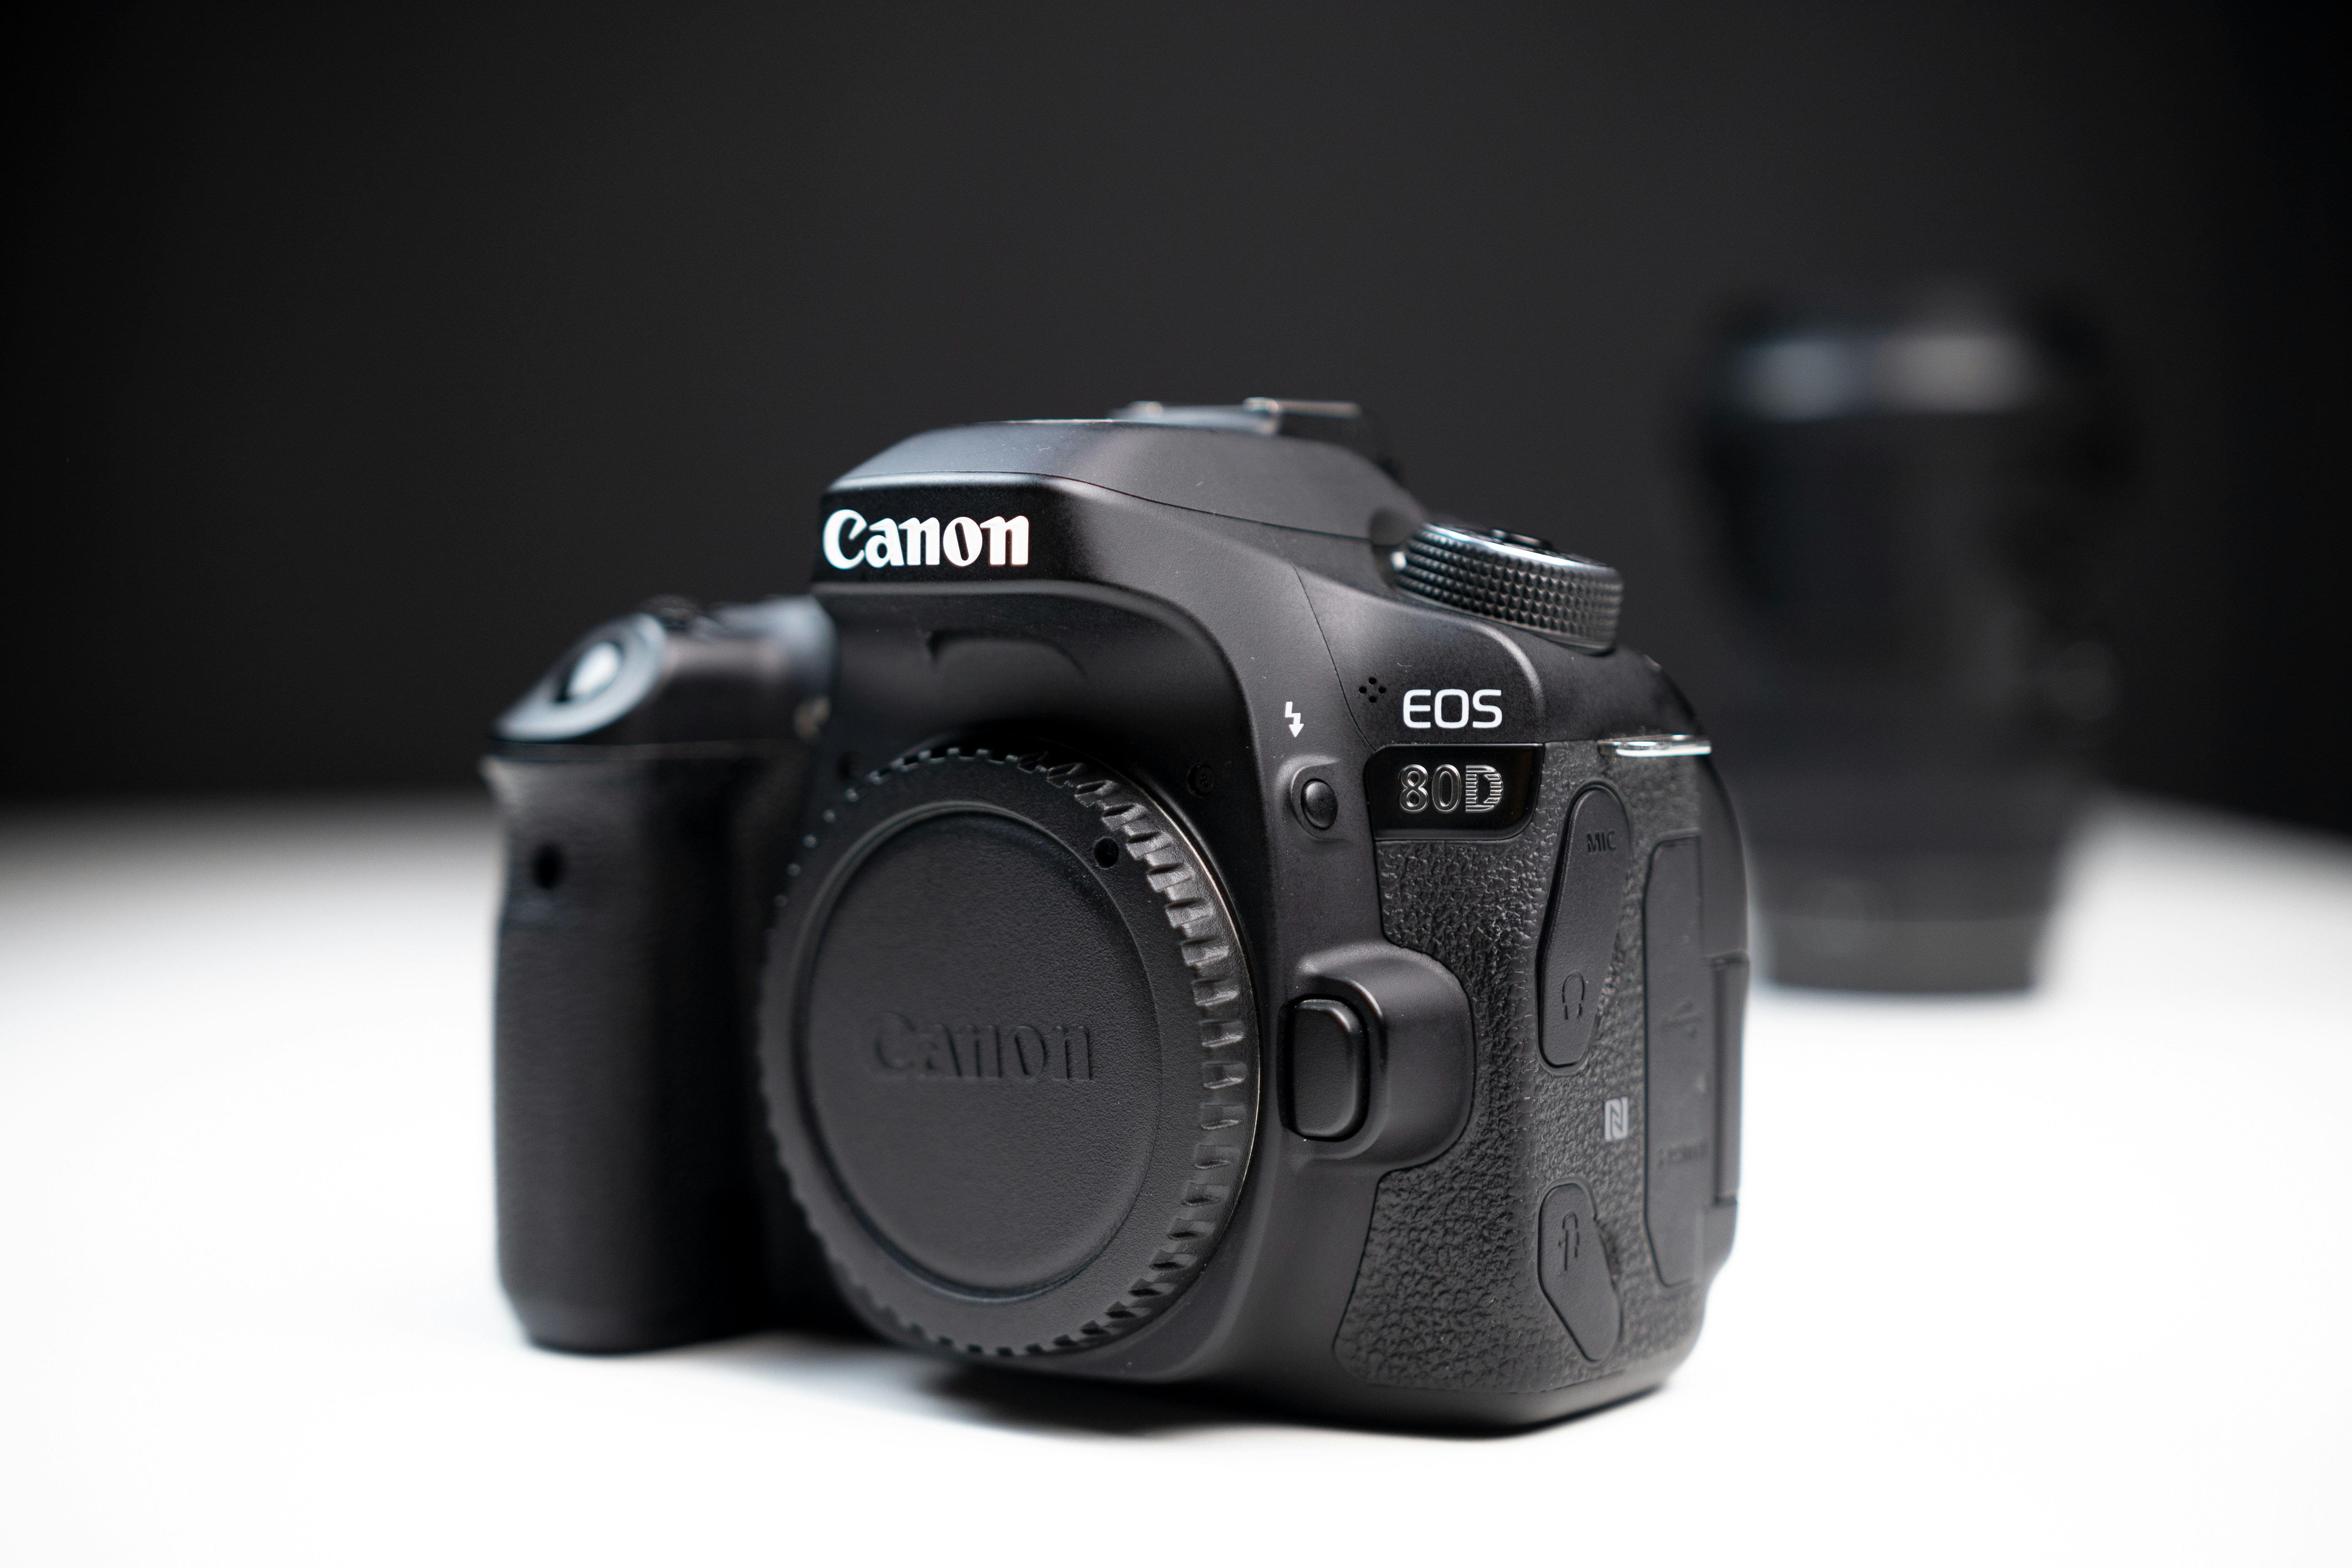 canon 80D DSLR camera body with lens in the background